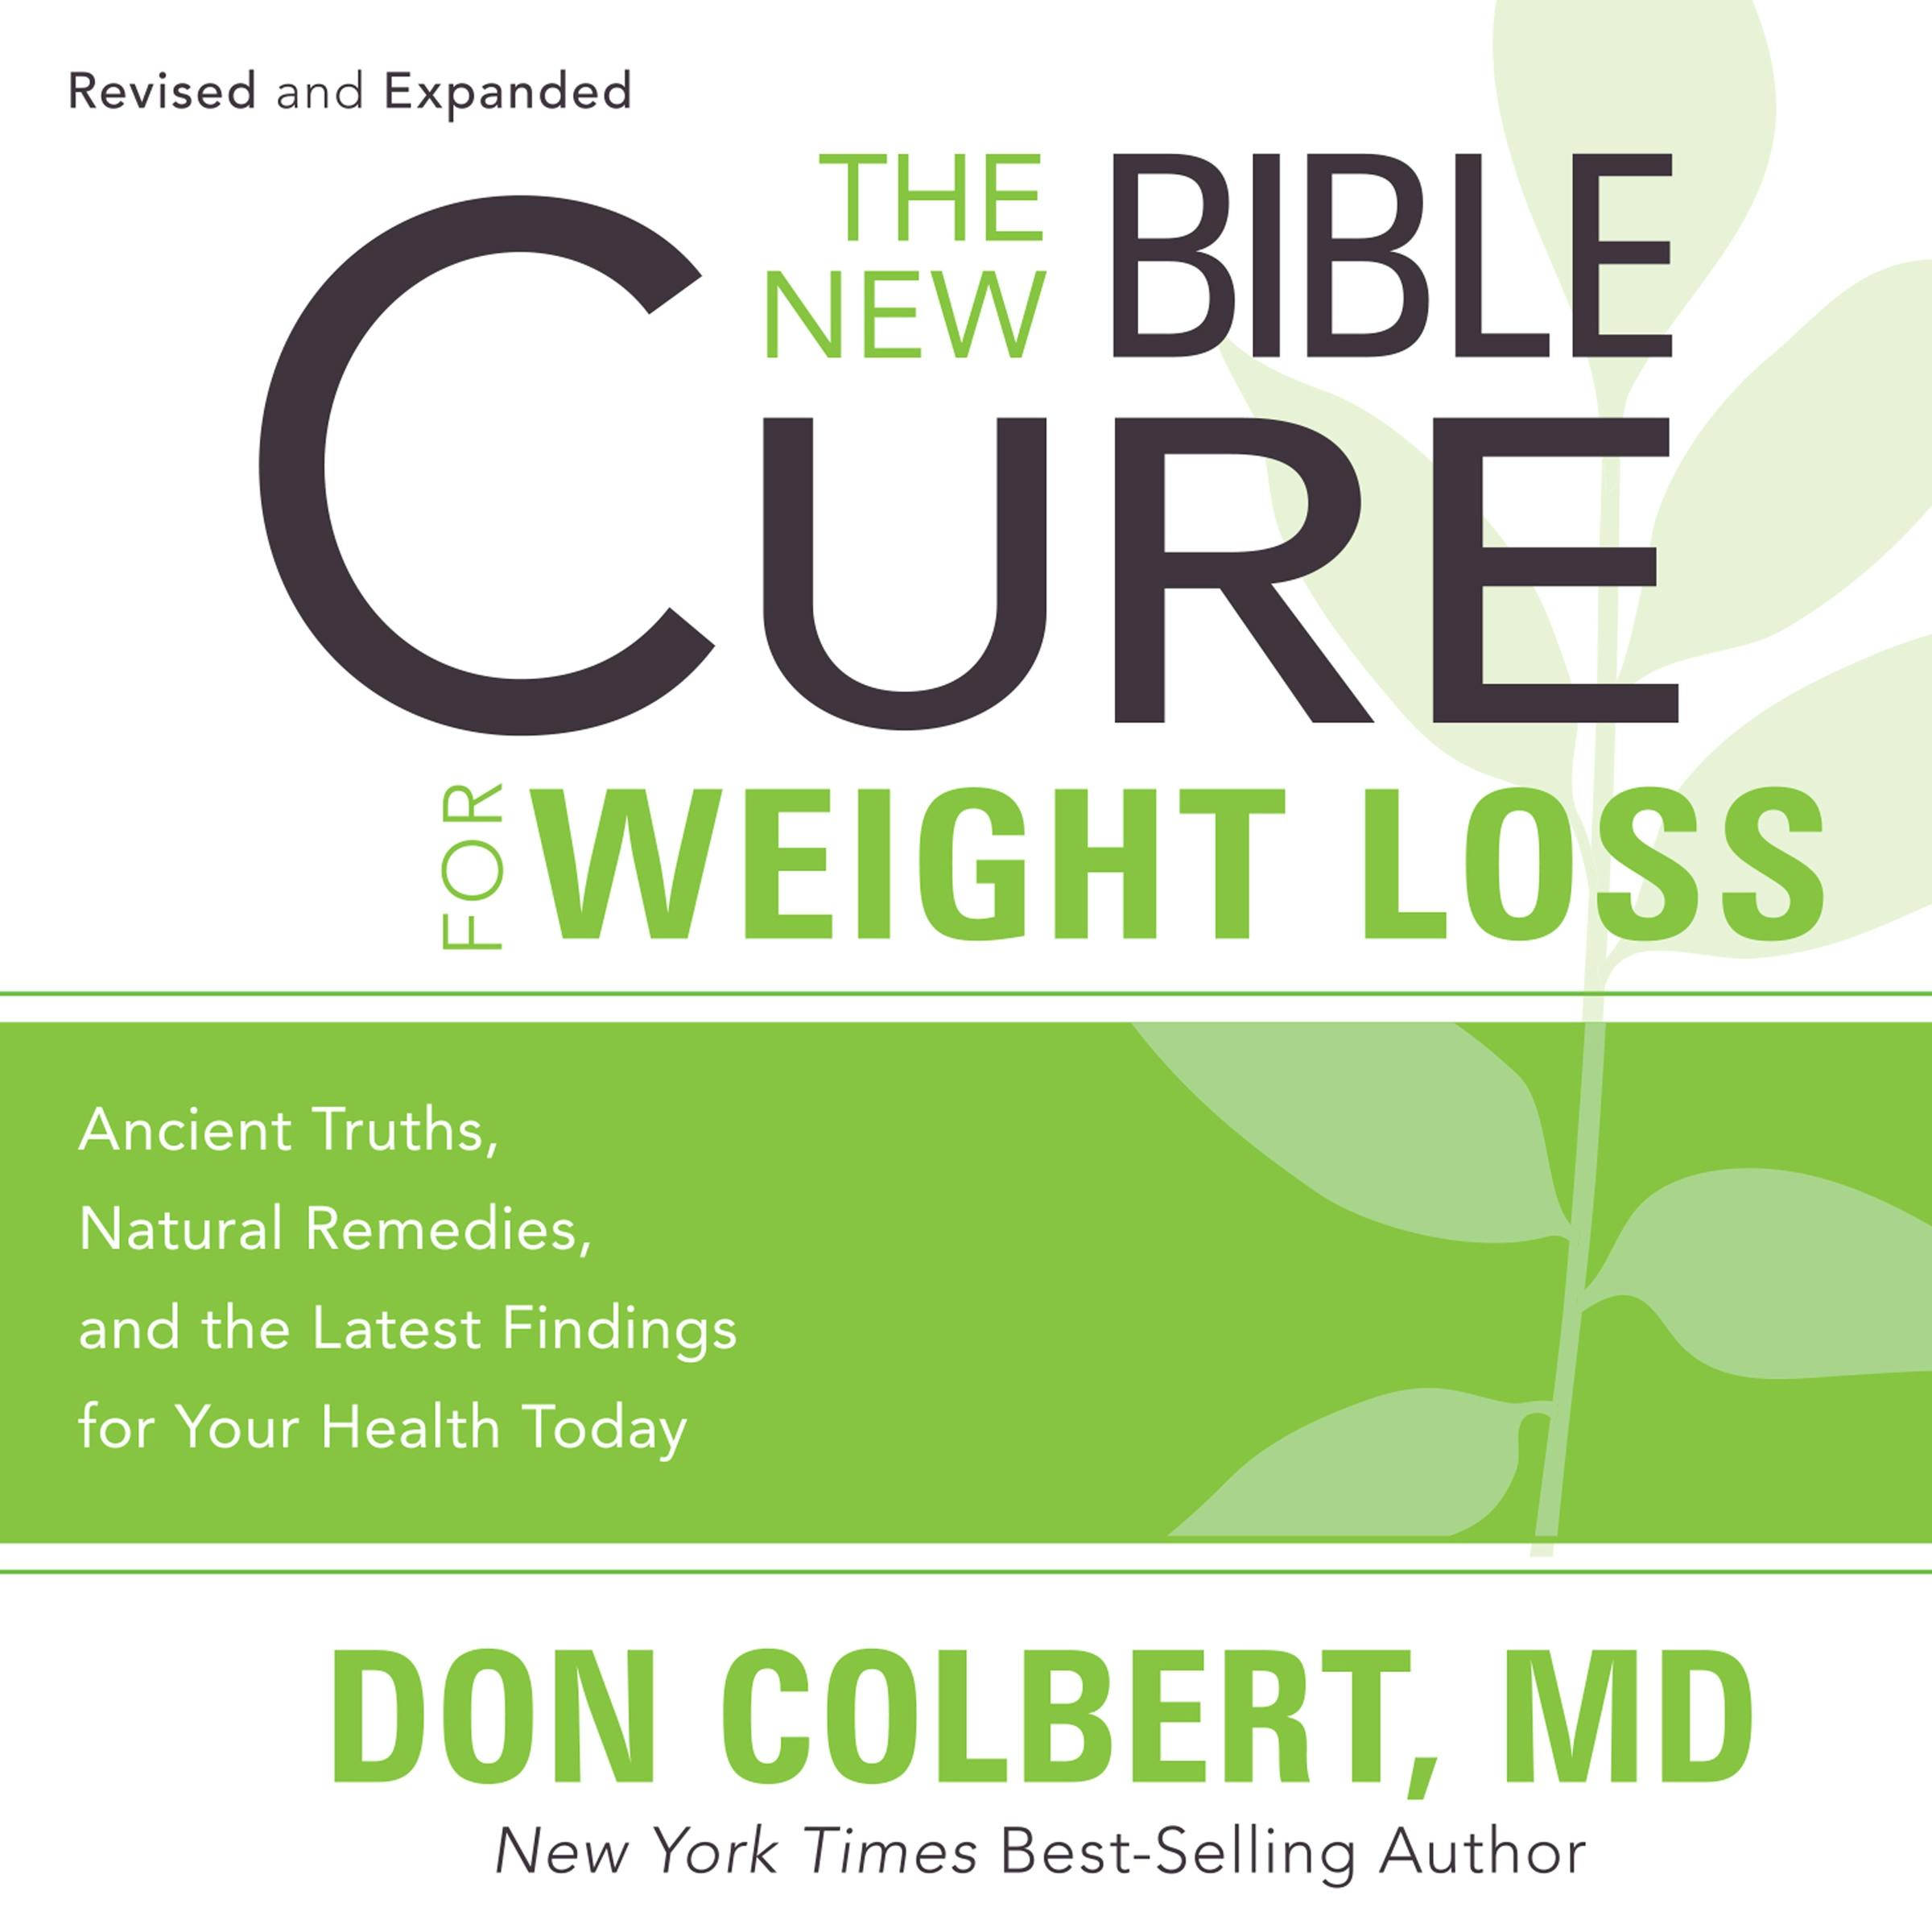 The New Bible Cure for Weight Loss: Ancient Truths, Natural Remedies, and the Latest Findings for Your Health Today - Don Colbert